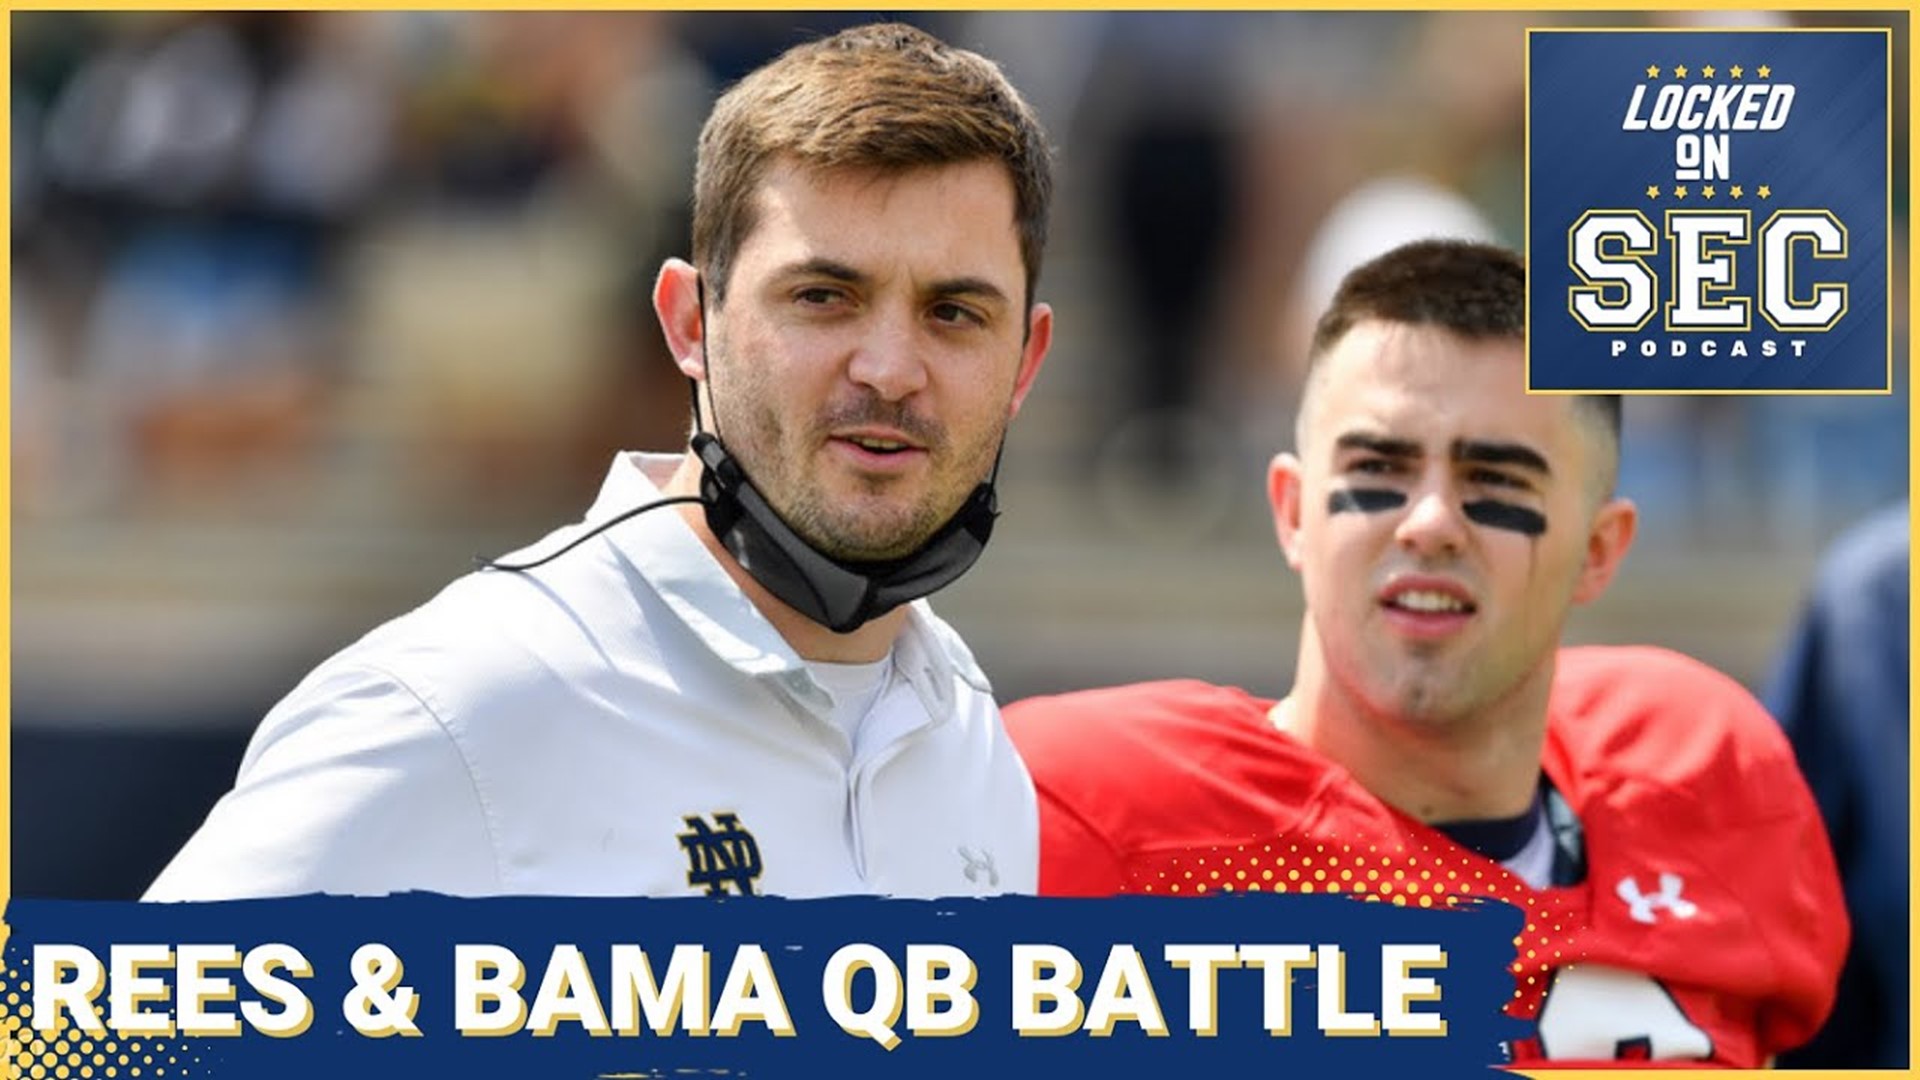 What Tommy Rees Means for Bama's QB Battle, Ducking Transfers, S Carolina Renovations Coming